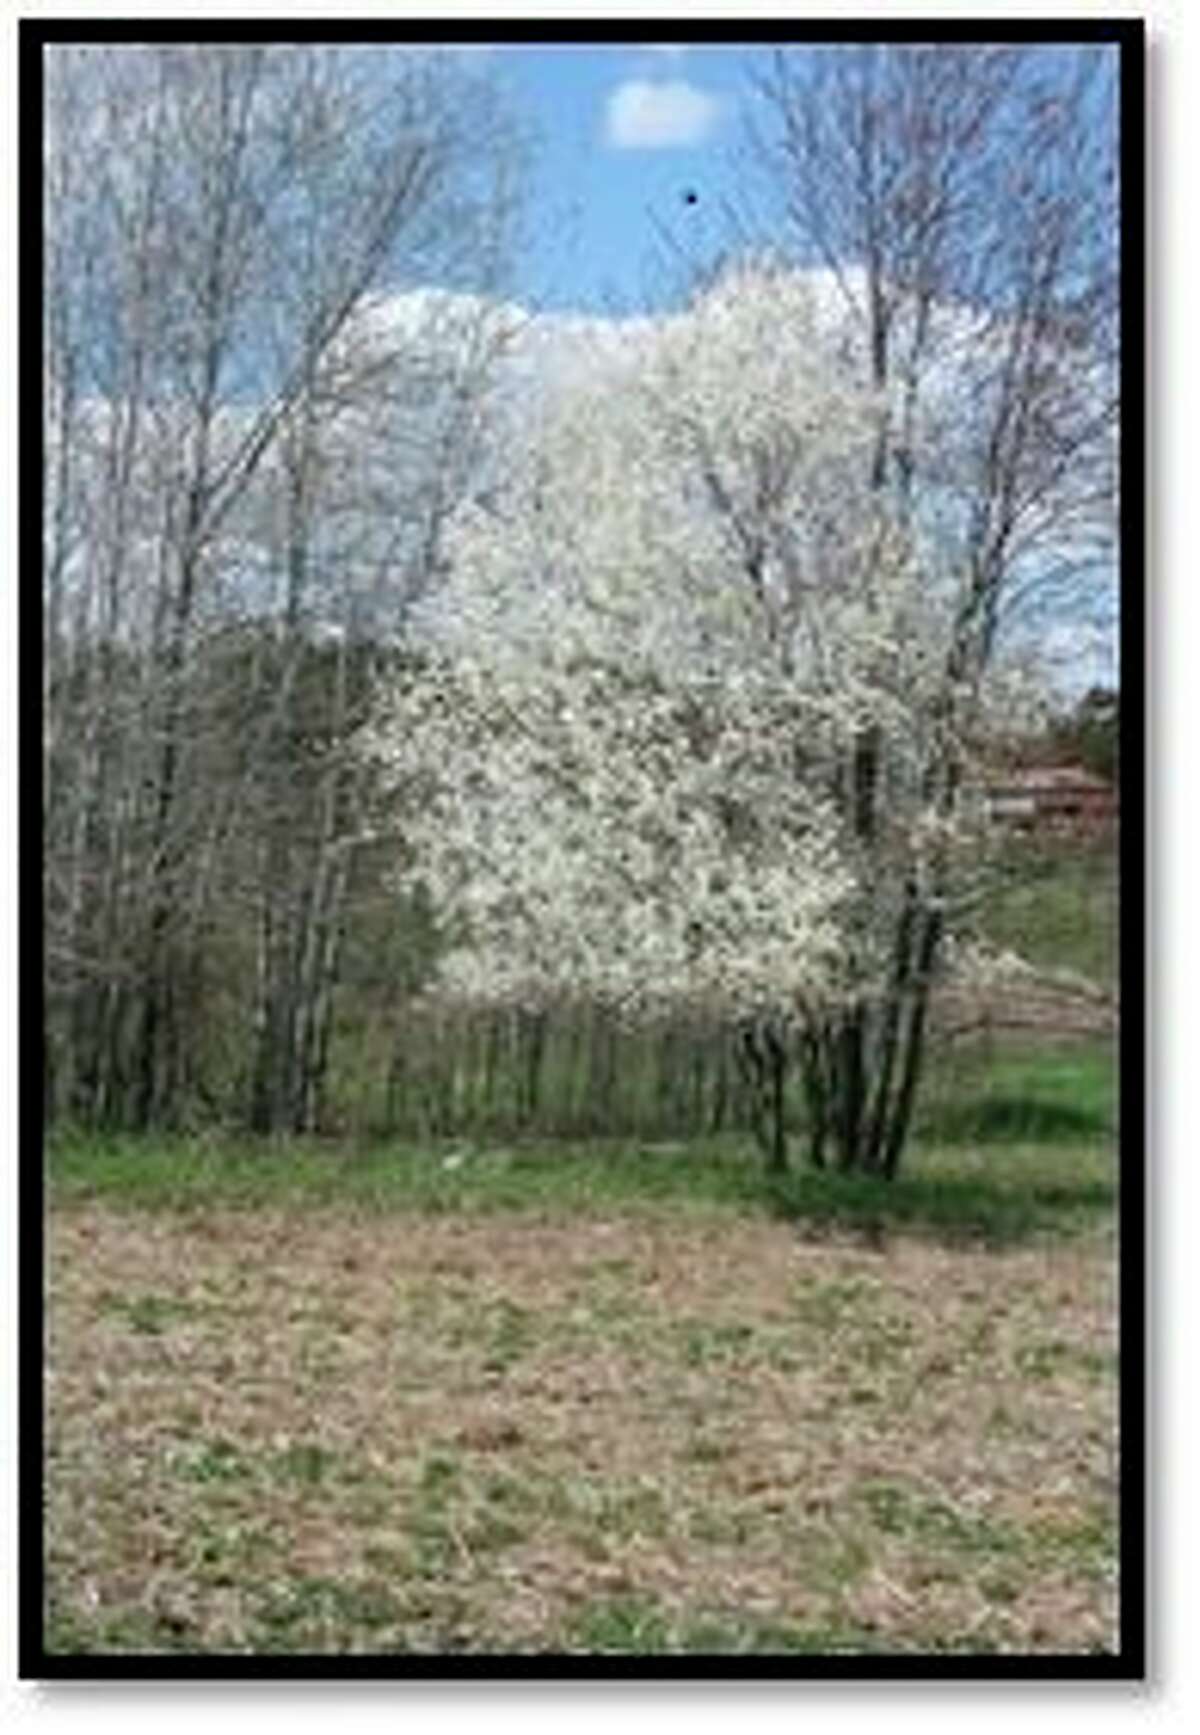 Amelanchier is a plant that has several names such as serviceberry, shadblow and juneberry based on its timing of bloom and fruit ripening. (Photo provided/Chuck Martin)